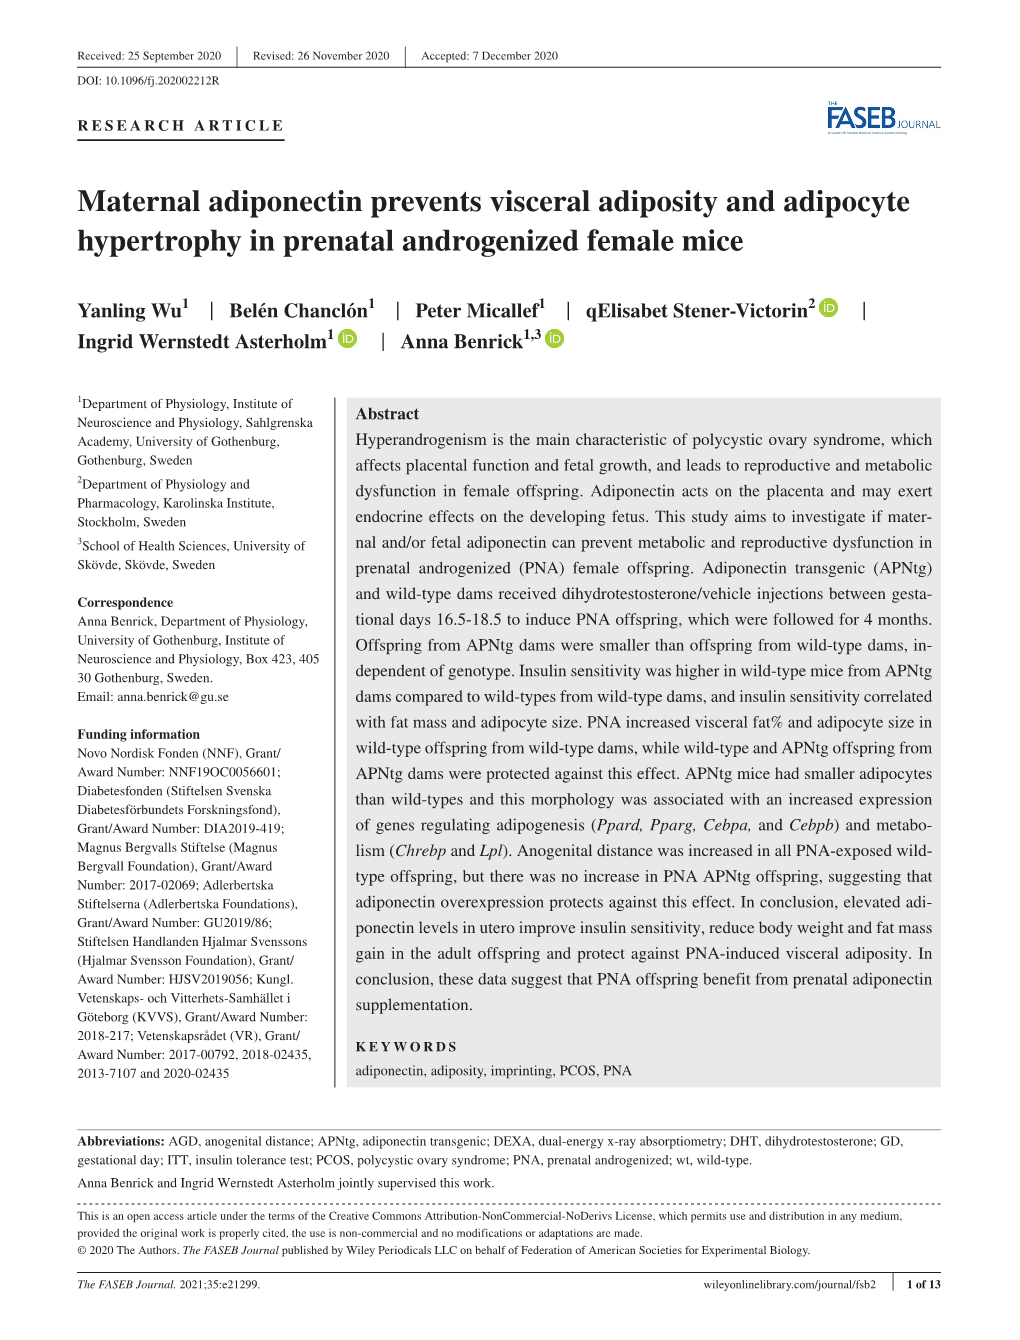 Maternal Adiponectin Prevents Visceral Adiposity and Adipocyte Hypertrophy in Prenatal Androgenized Female Mice